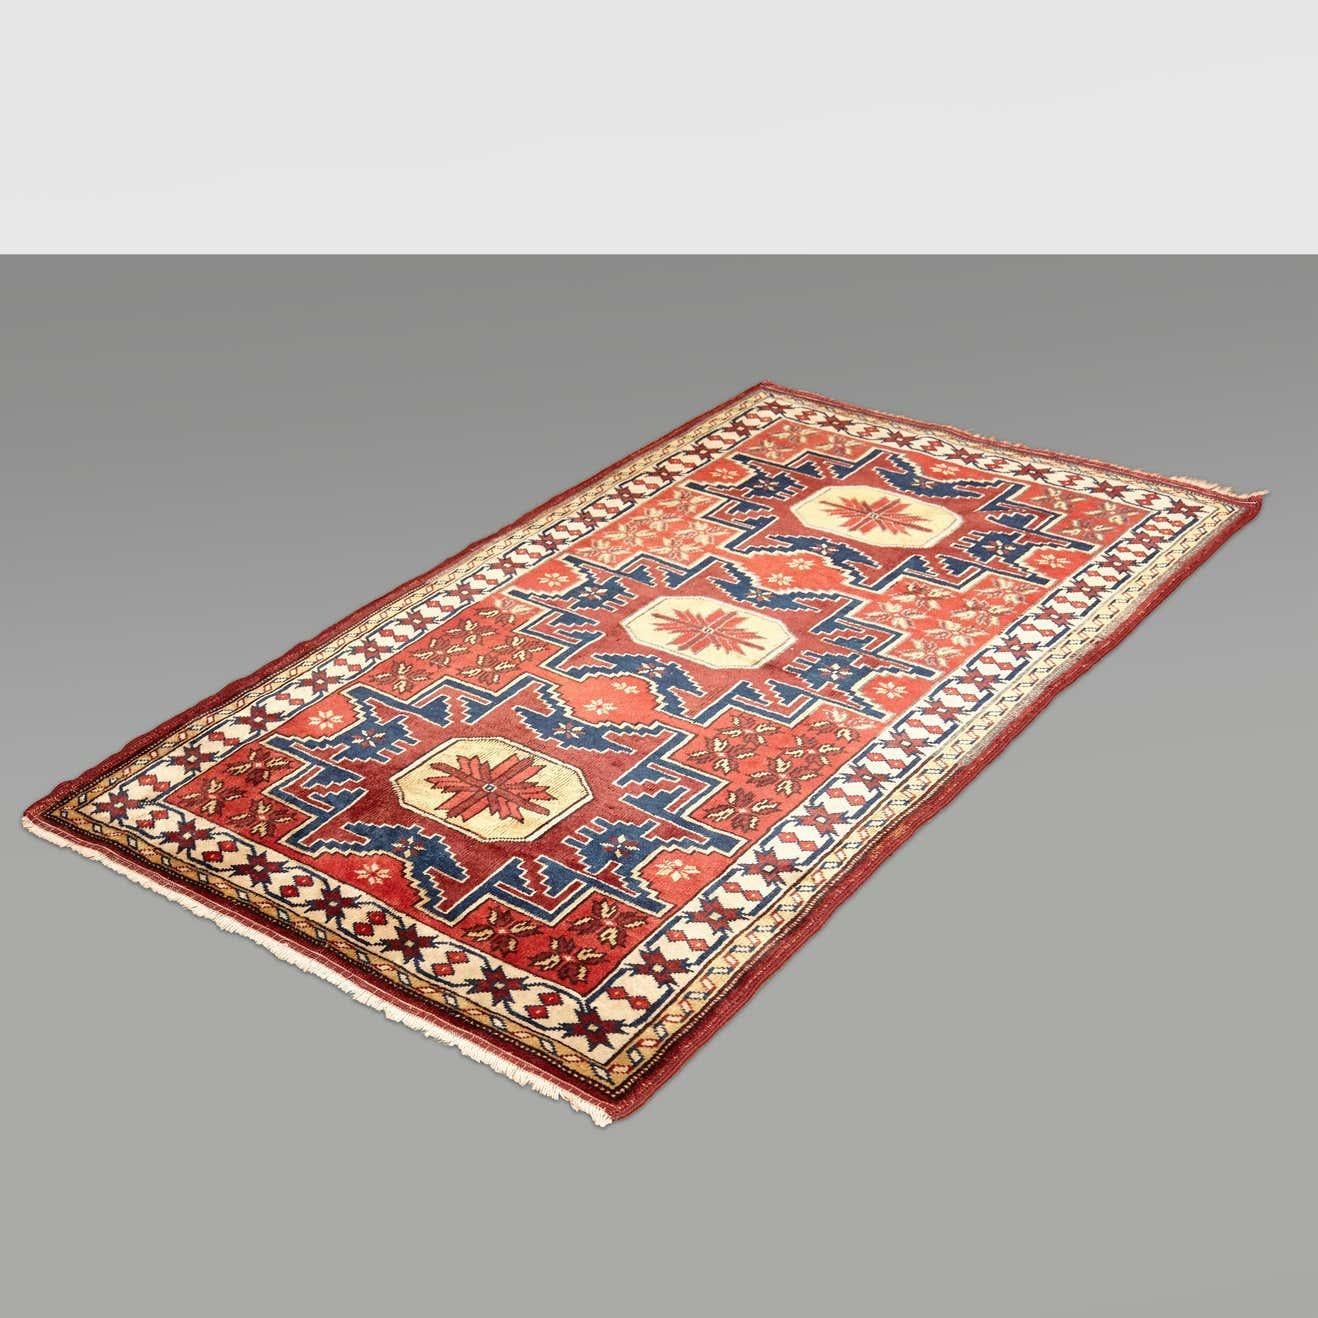 Caucas Armenia Leshghi antic wool rug, measures: 107 x 183cm

In original condition with minor wear consistent of age and use, preserving a beautiful patina.

